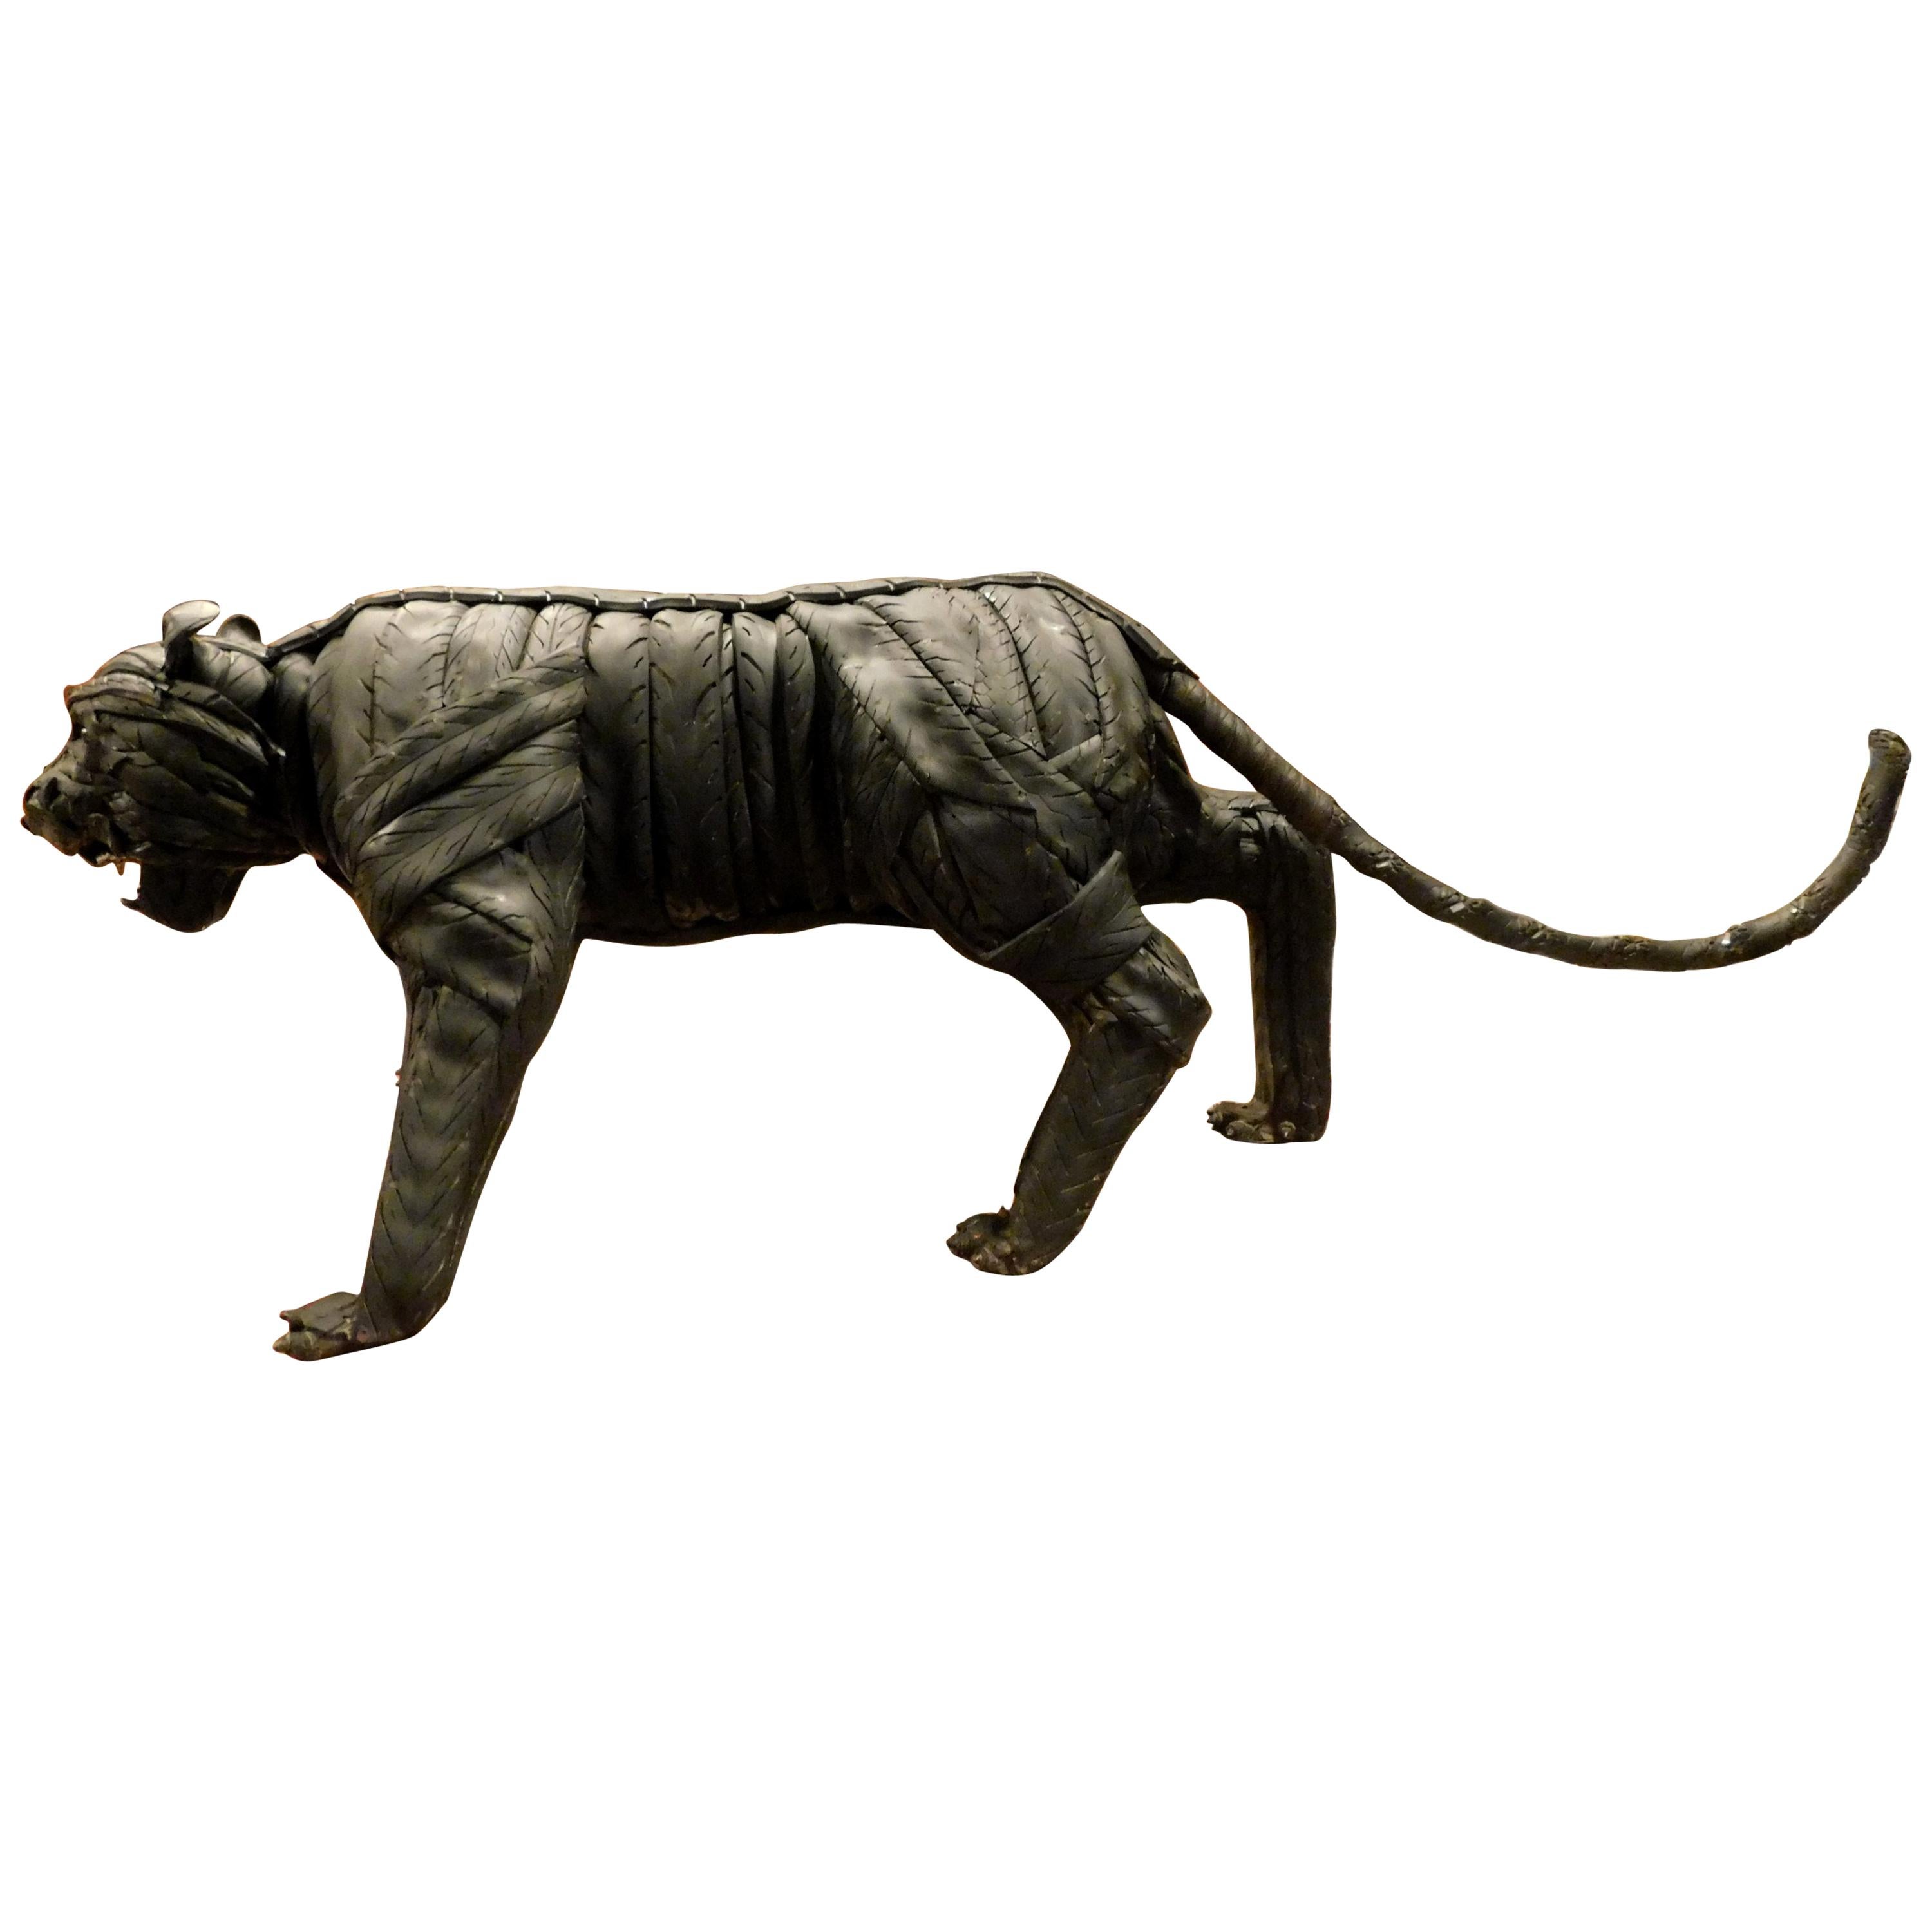 Black Panther Statue of Reused Tire, Italian Art, 1900 For Sale